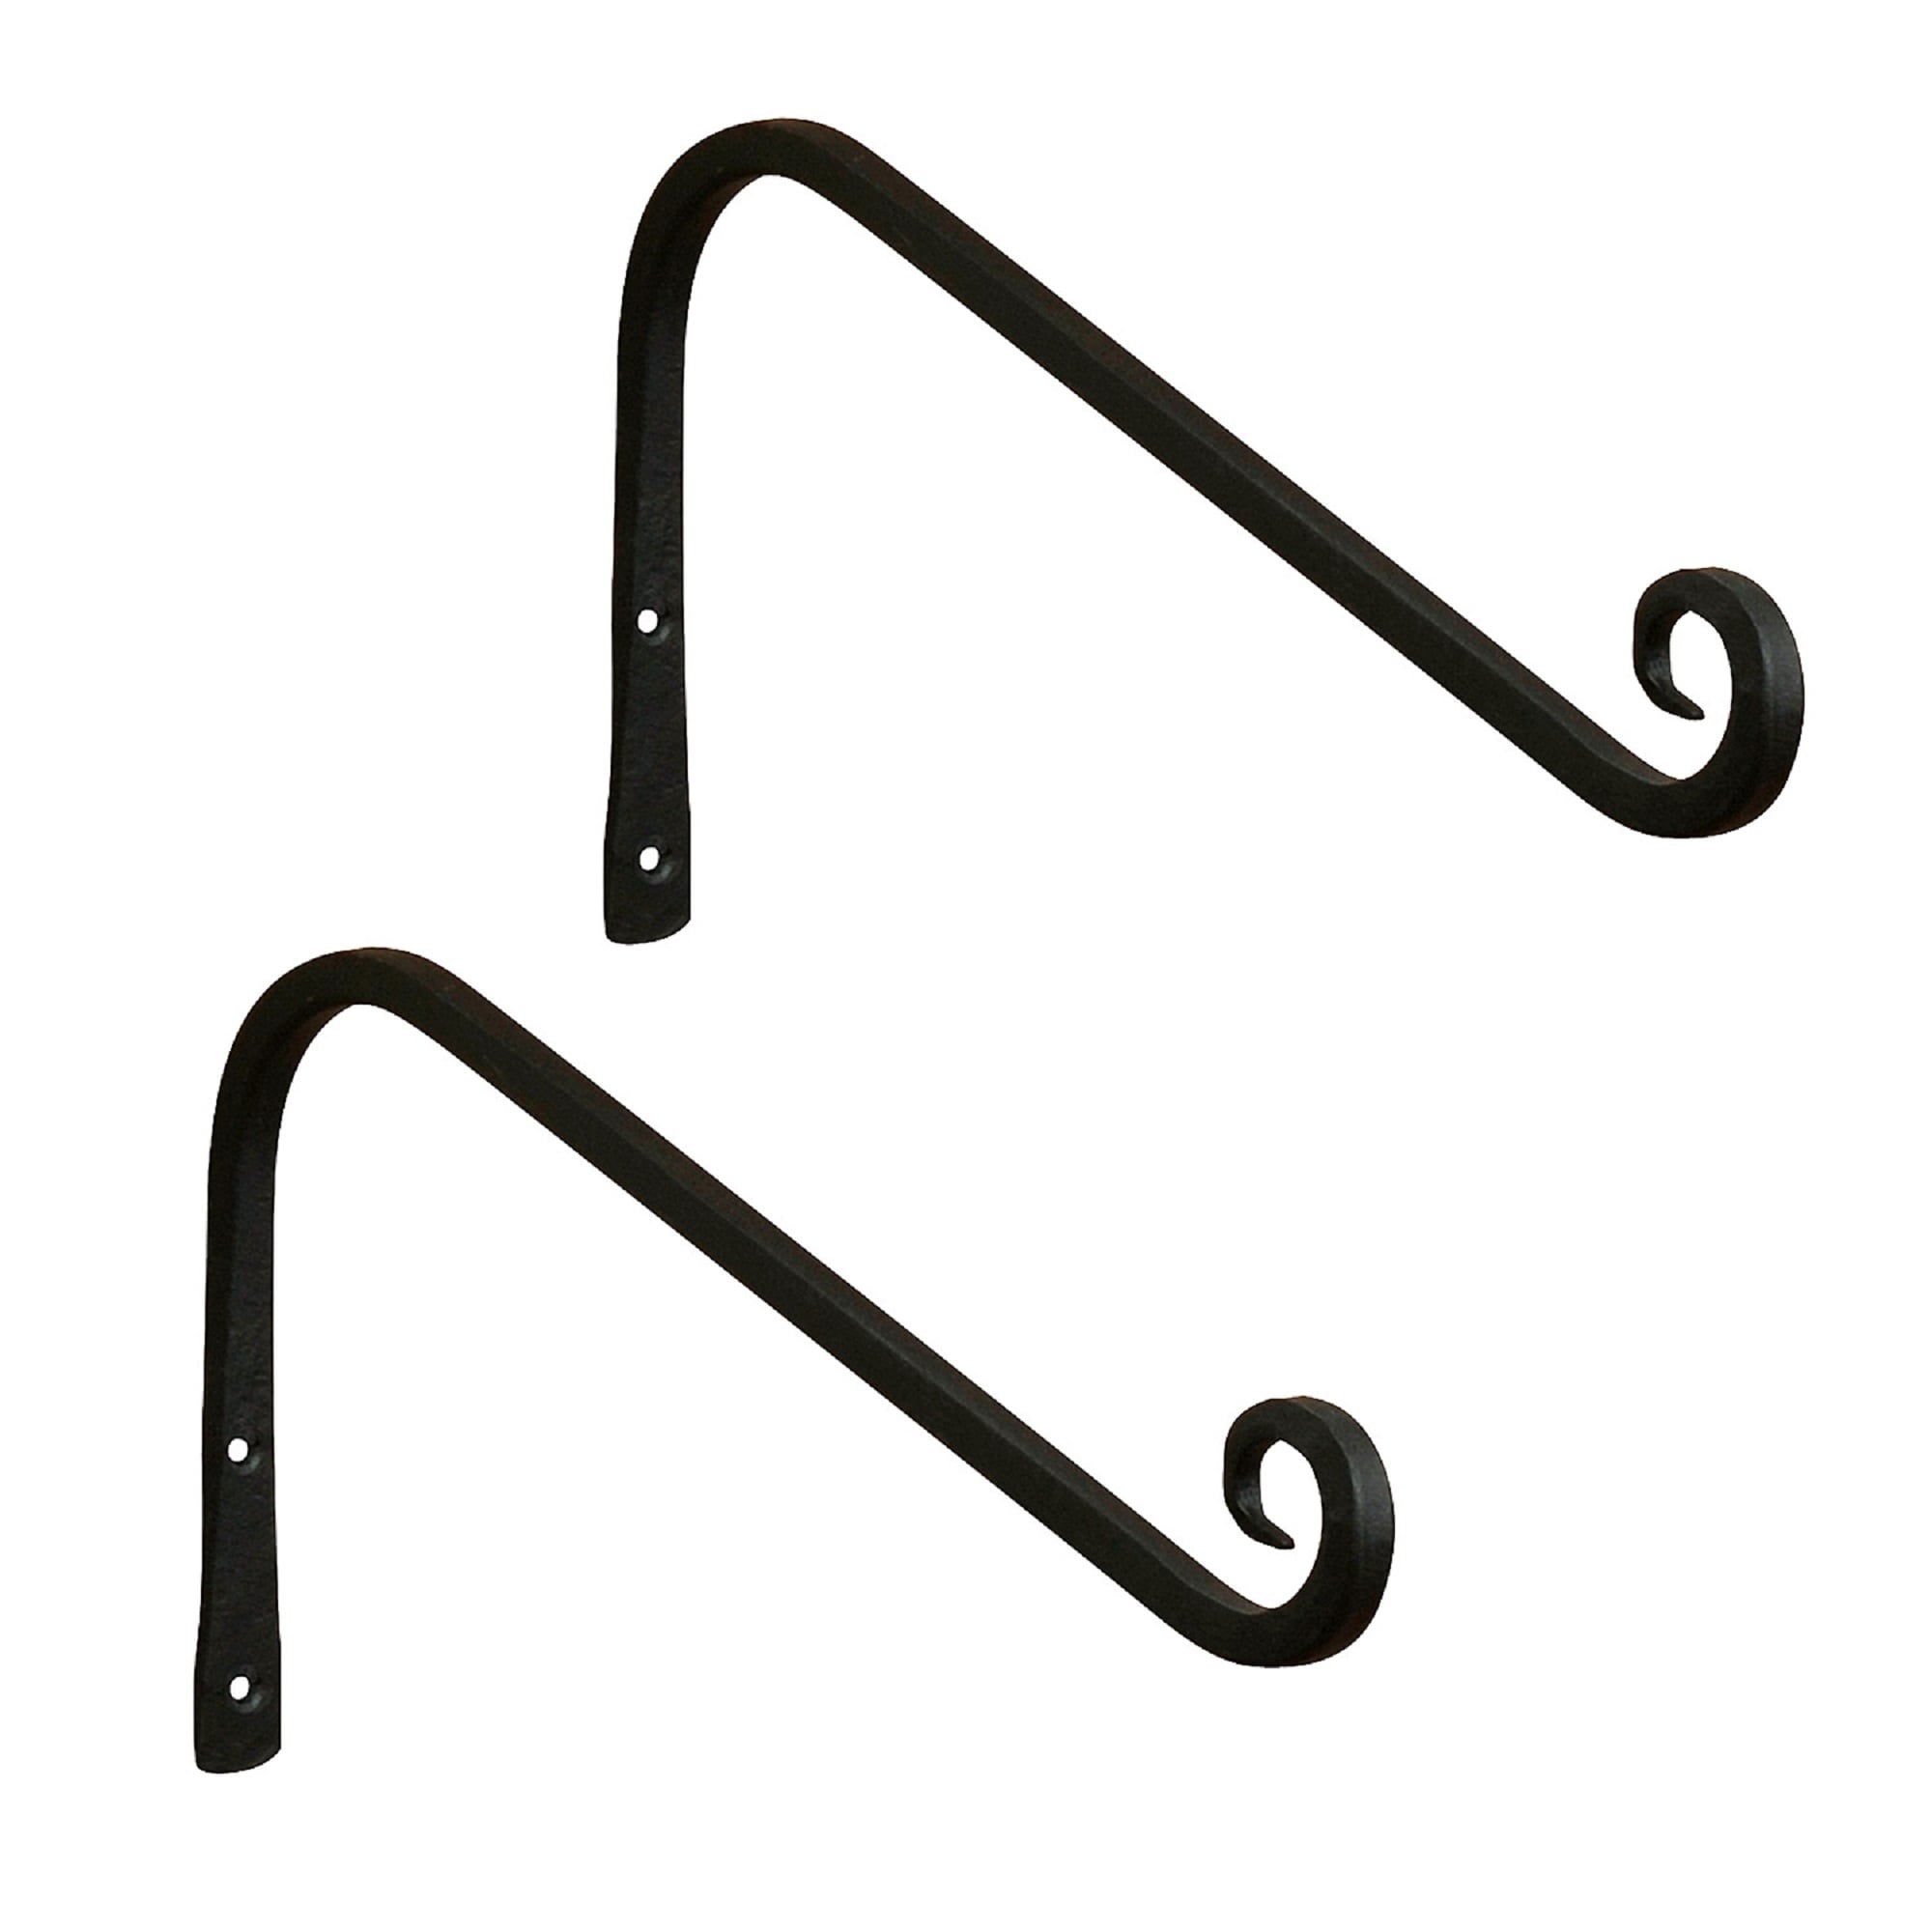 Achla Designs Lodge Wrought Iron Up-Curled  Wall Bracket Hook